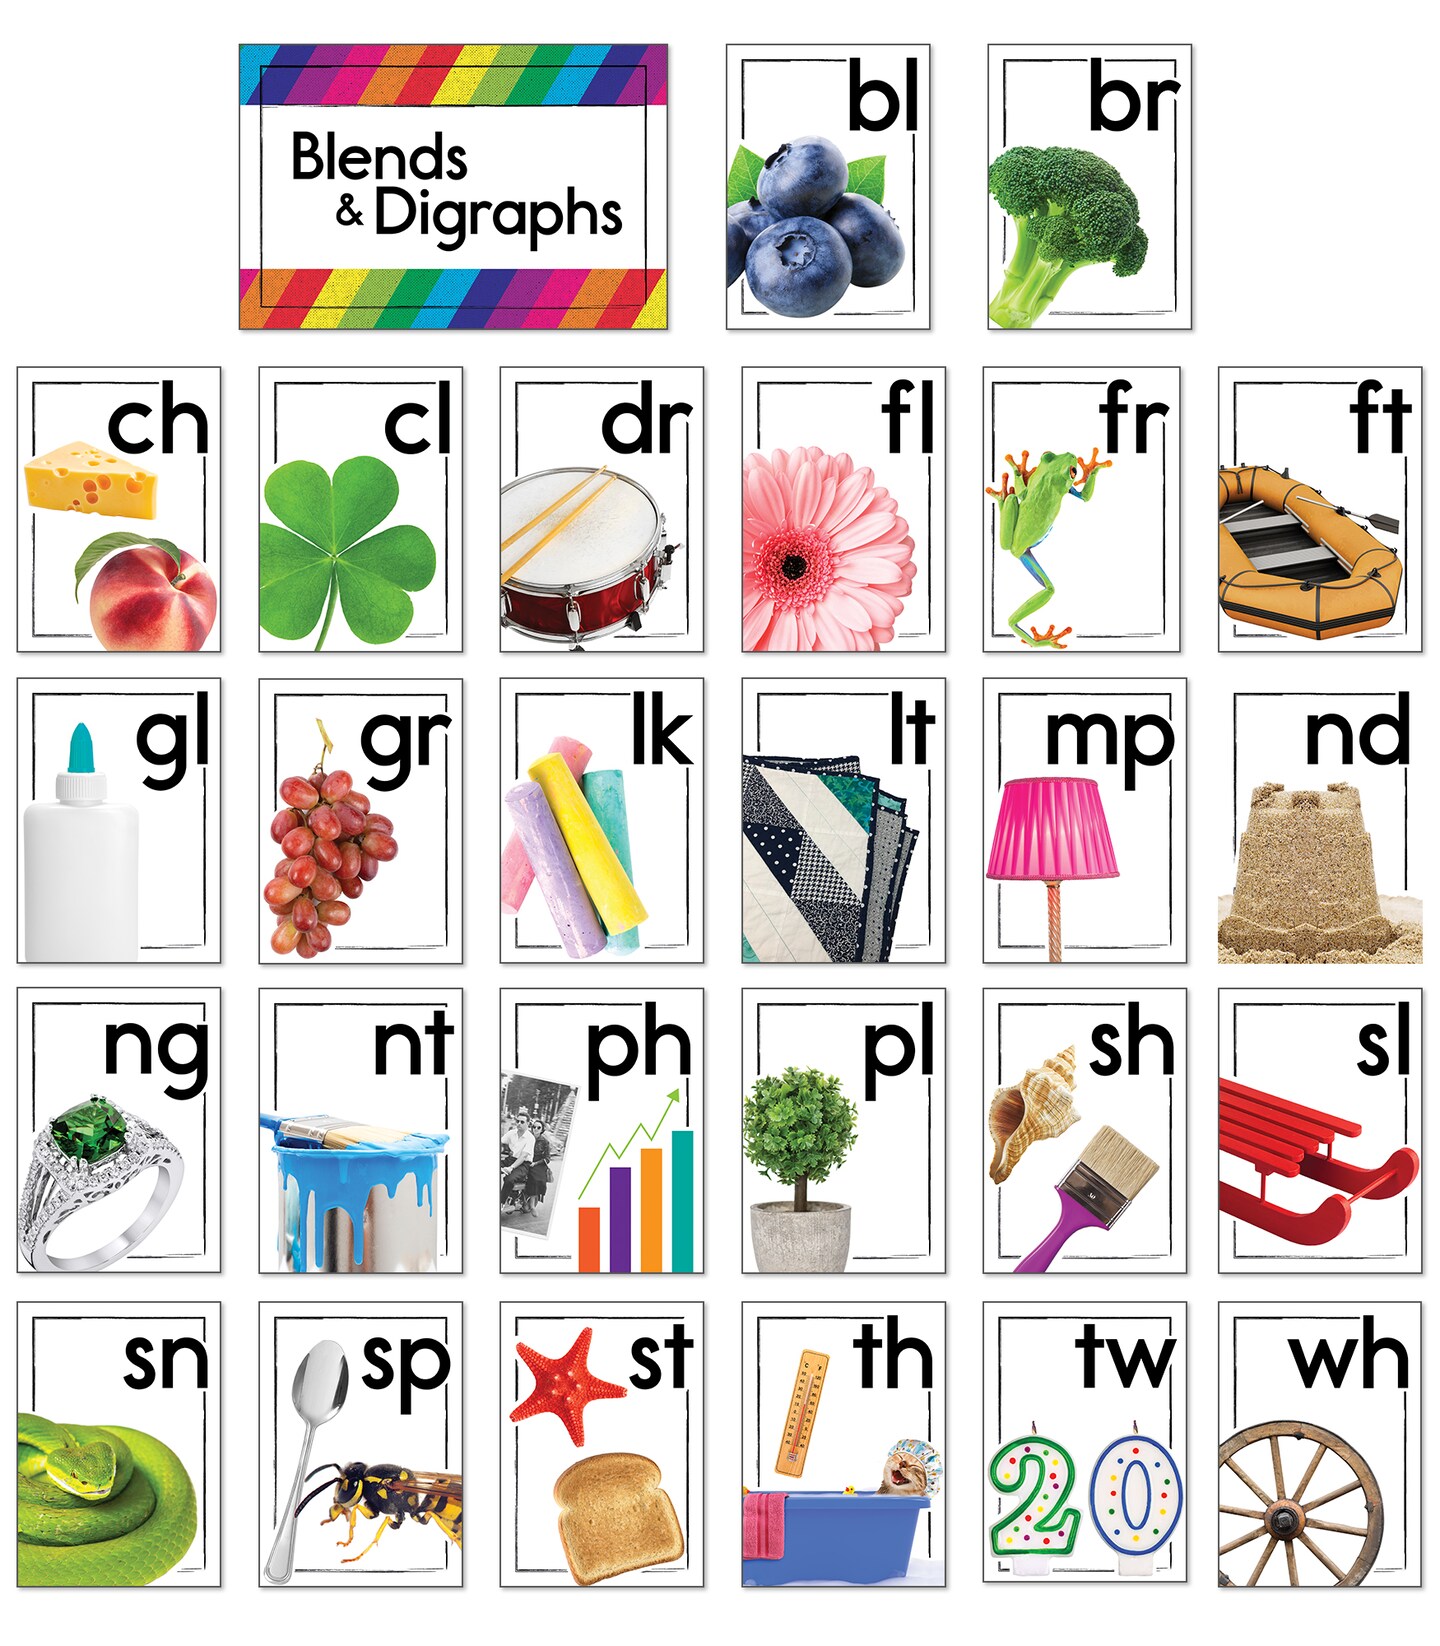 Carson Dellosa Blends and Digraphs Bulletin Board Set&#x2014;Blend Cards, Digraph Cards, and Header for Bulletin Boards and Grammar Learning, Homeschool or Classroom D&#xE9;cor (35 pc)